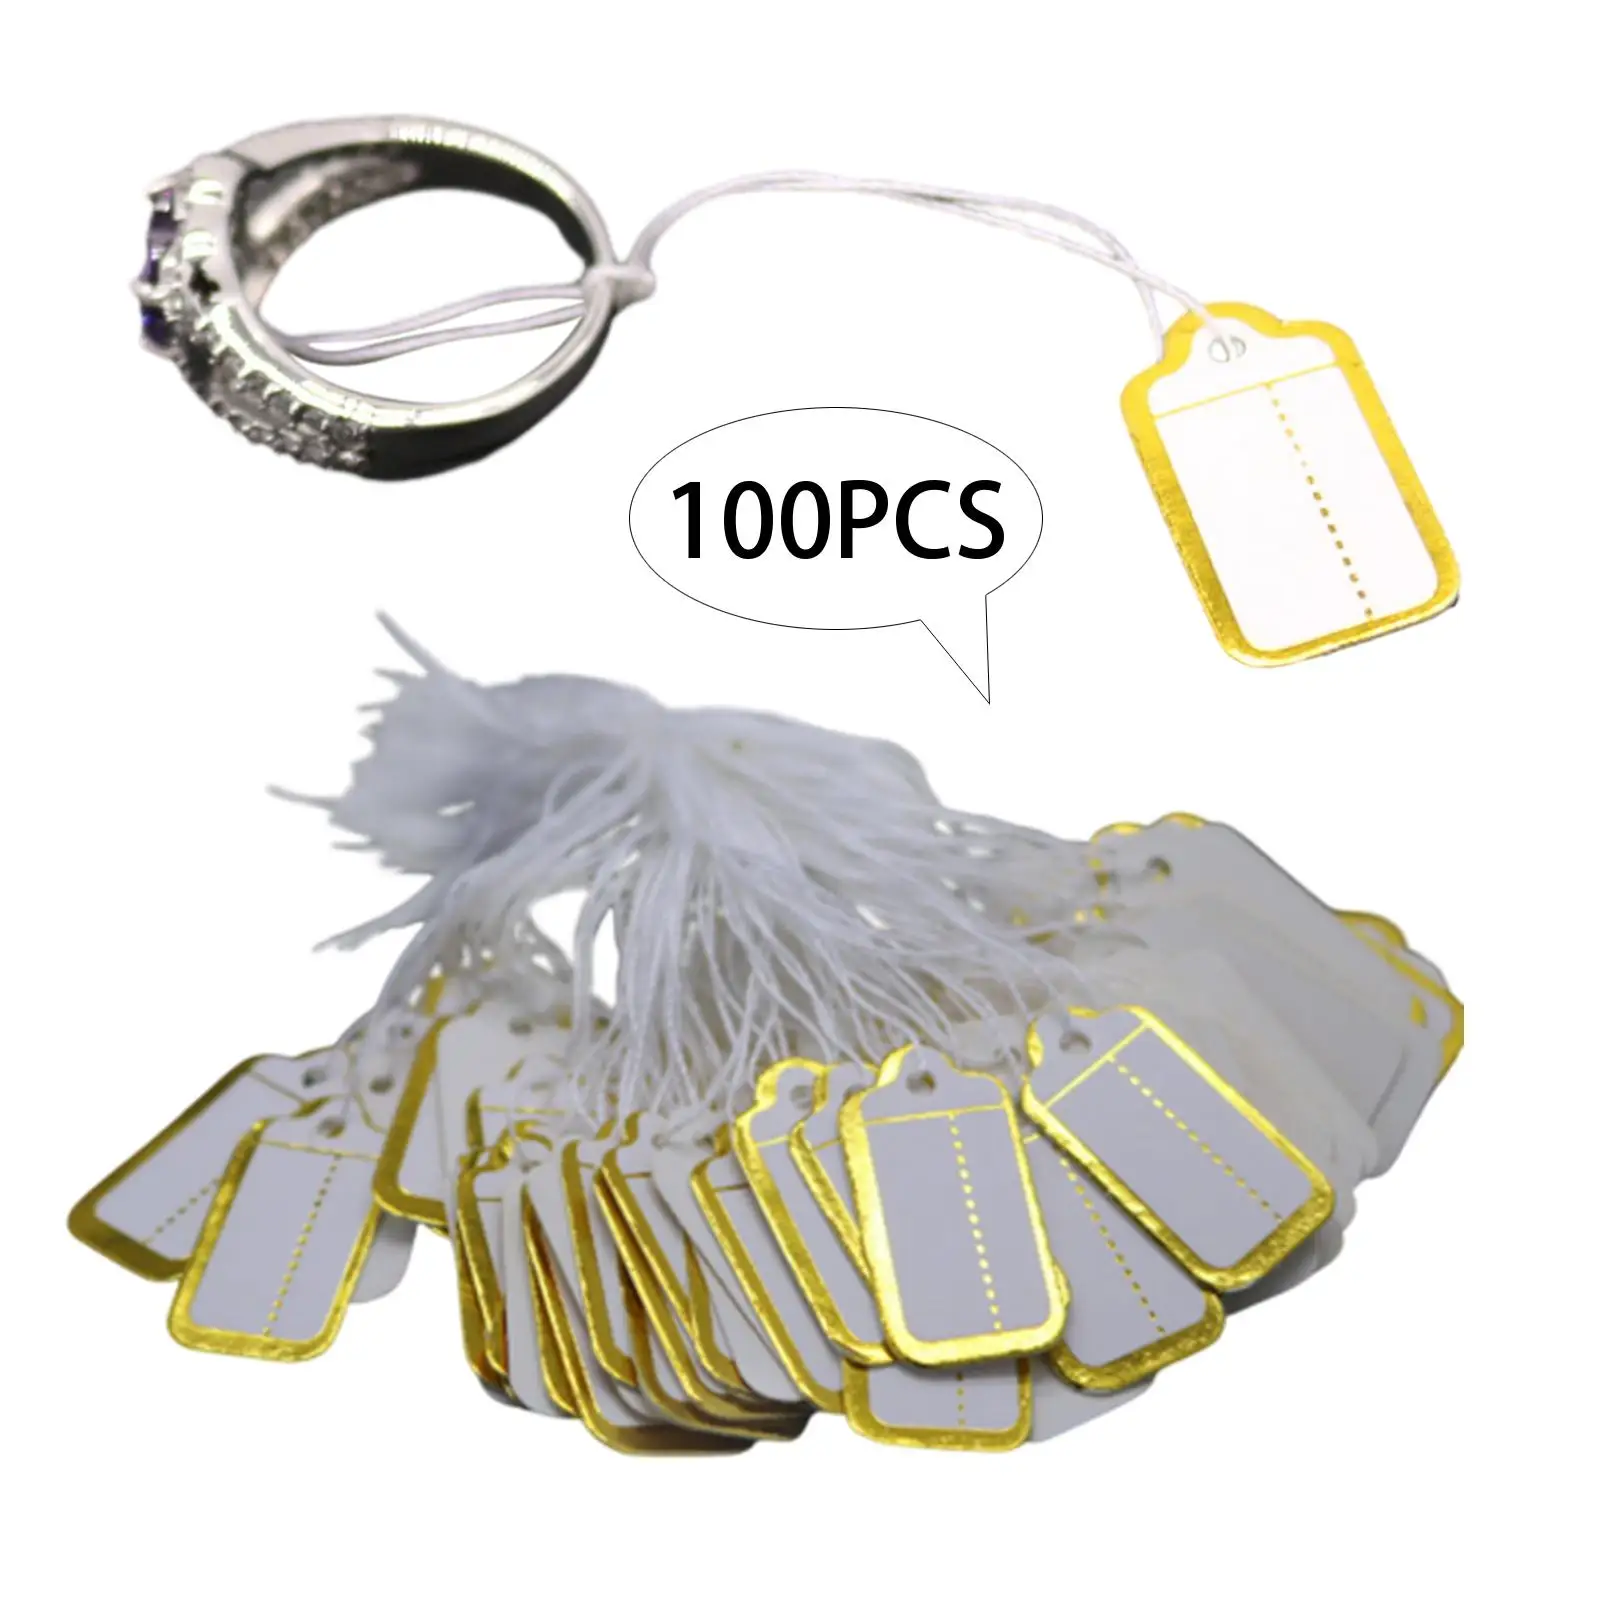 100 Pieces Price Tags with String Attached Blank Price Marking Tags Label for Retail Jewelry Wedding Clothing Party Favor